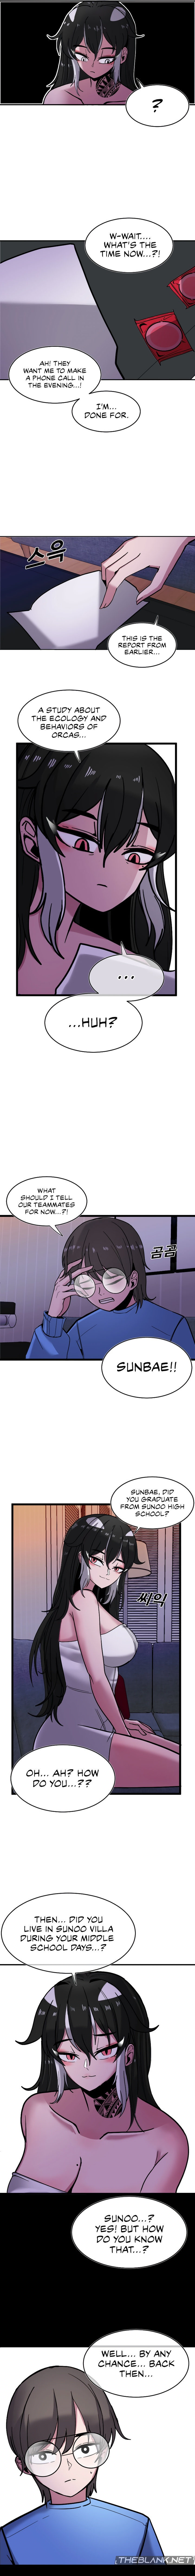 Double Life of Gukbap Chapter 2 - Page 7